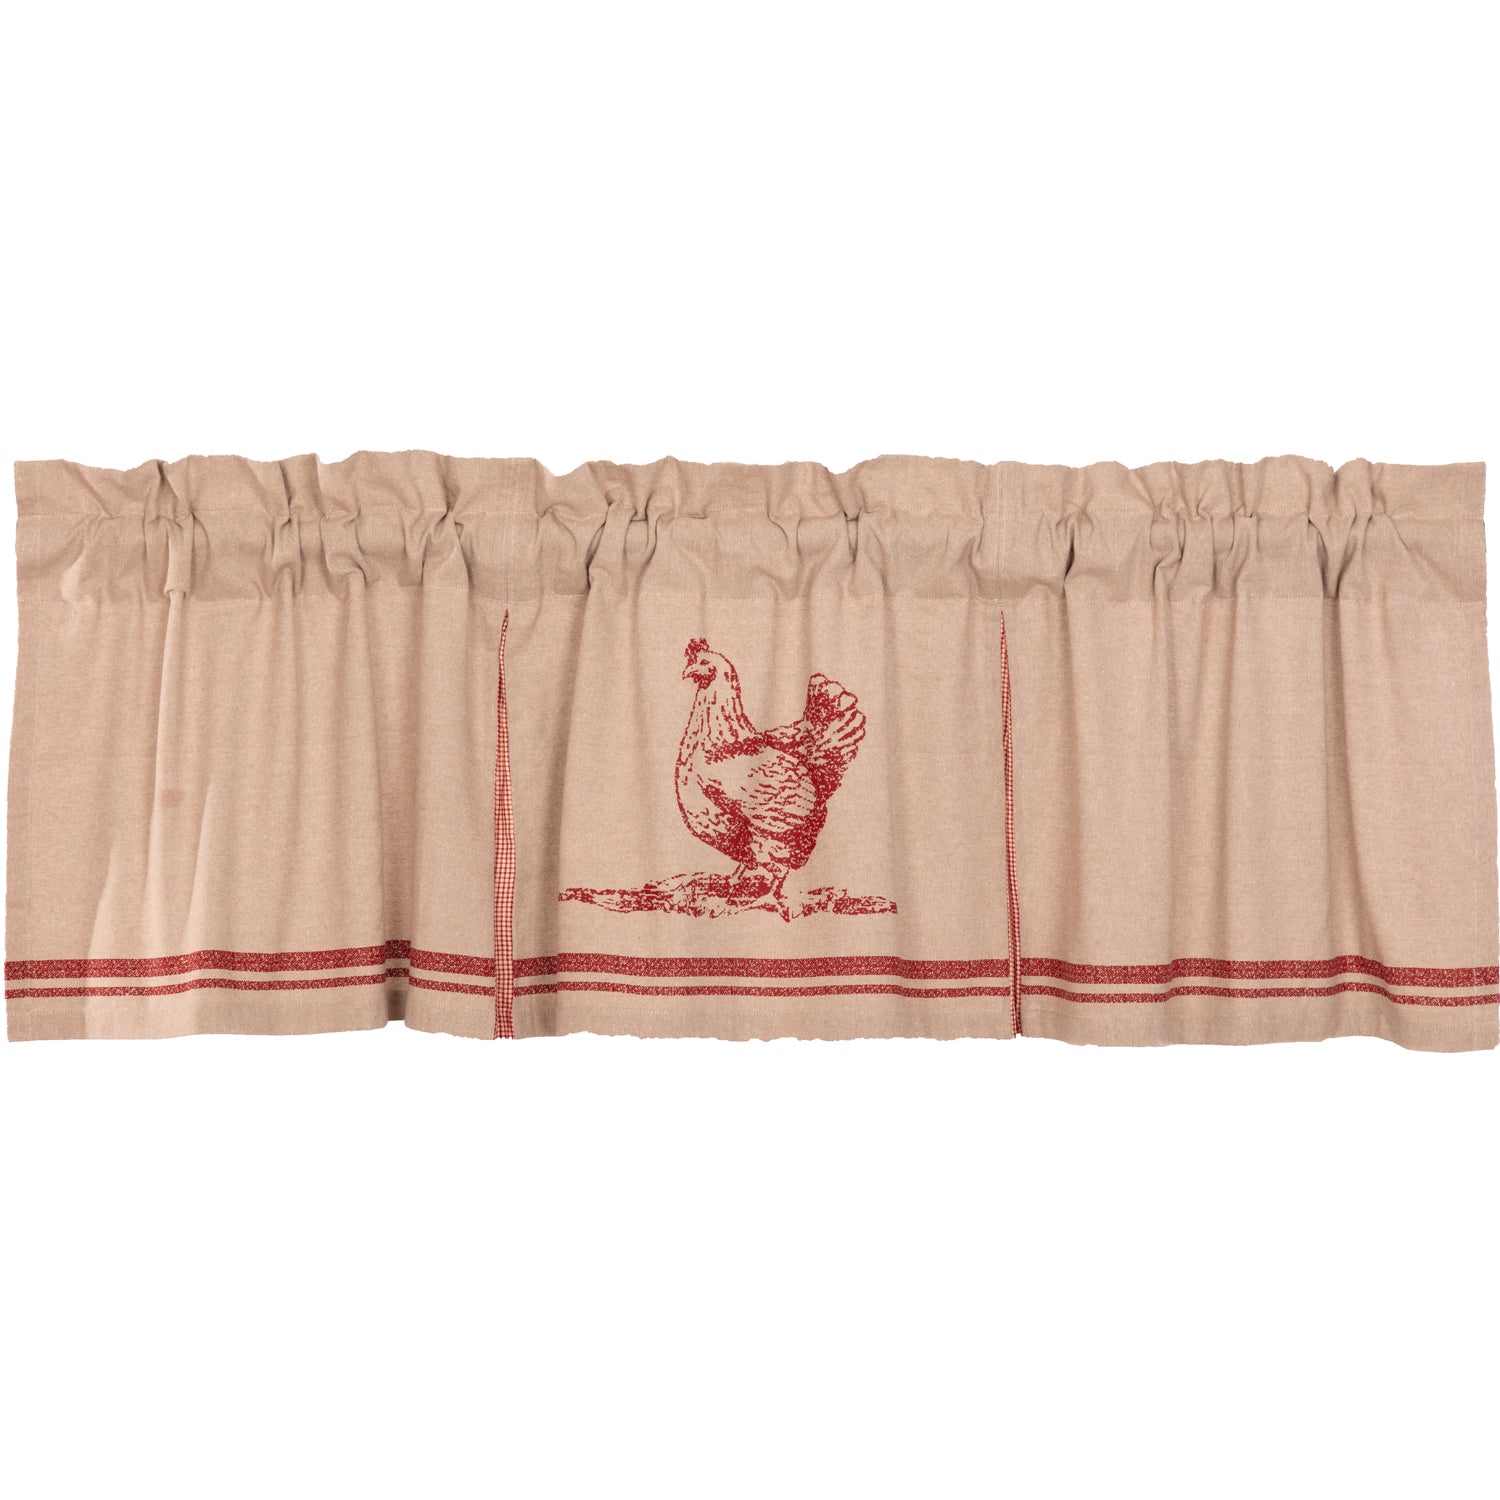 52207-Sawyer-Mill-Red-Chicken-Valance-Pleated-20x72-image-6